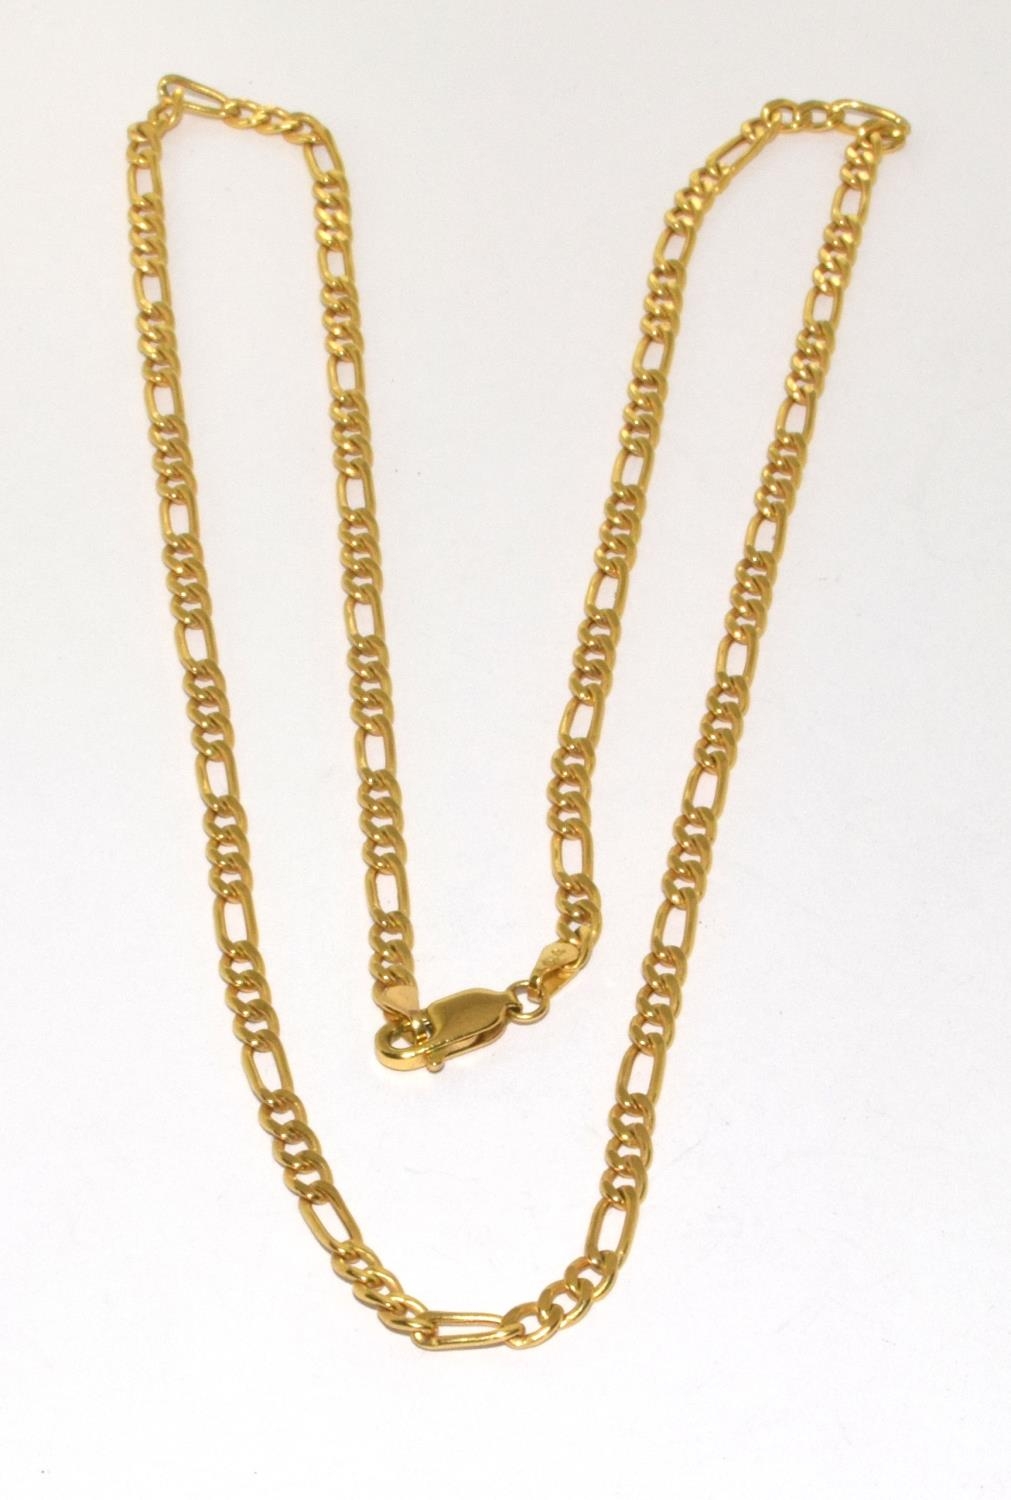 9ct gold figaro neck chain with lobster claw clasp 50cm long 3.3g